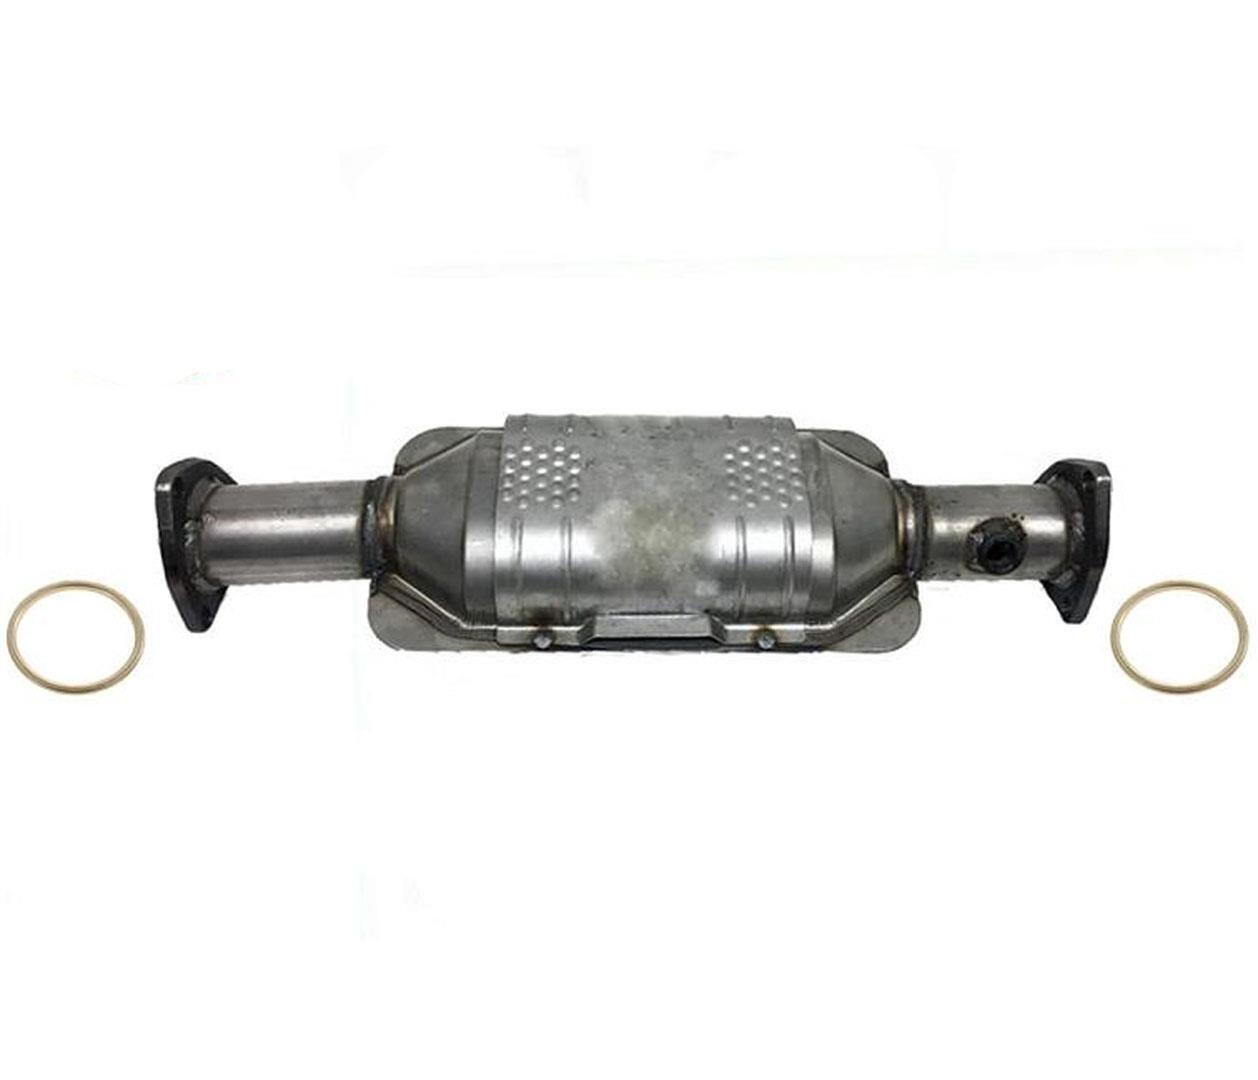 Fits For GM 96-98 Cavalier 2.2L Engine Only Catalytic Converter W Gaskets